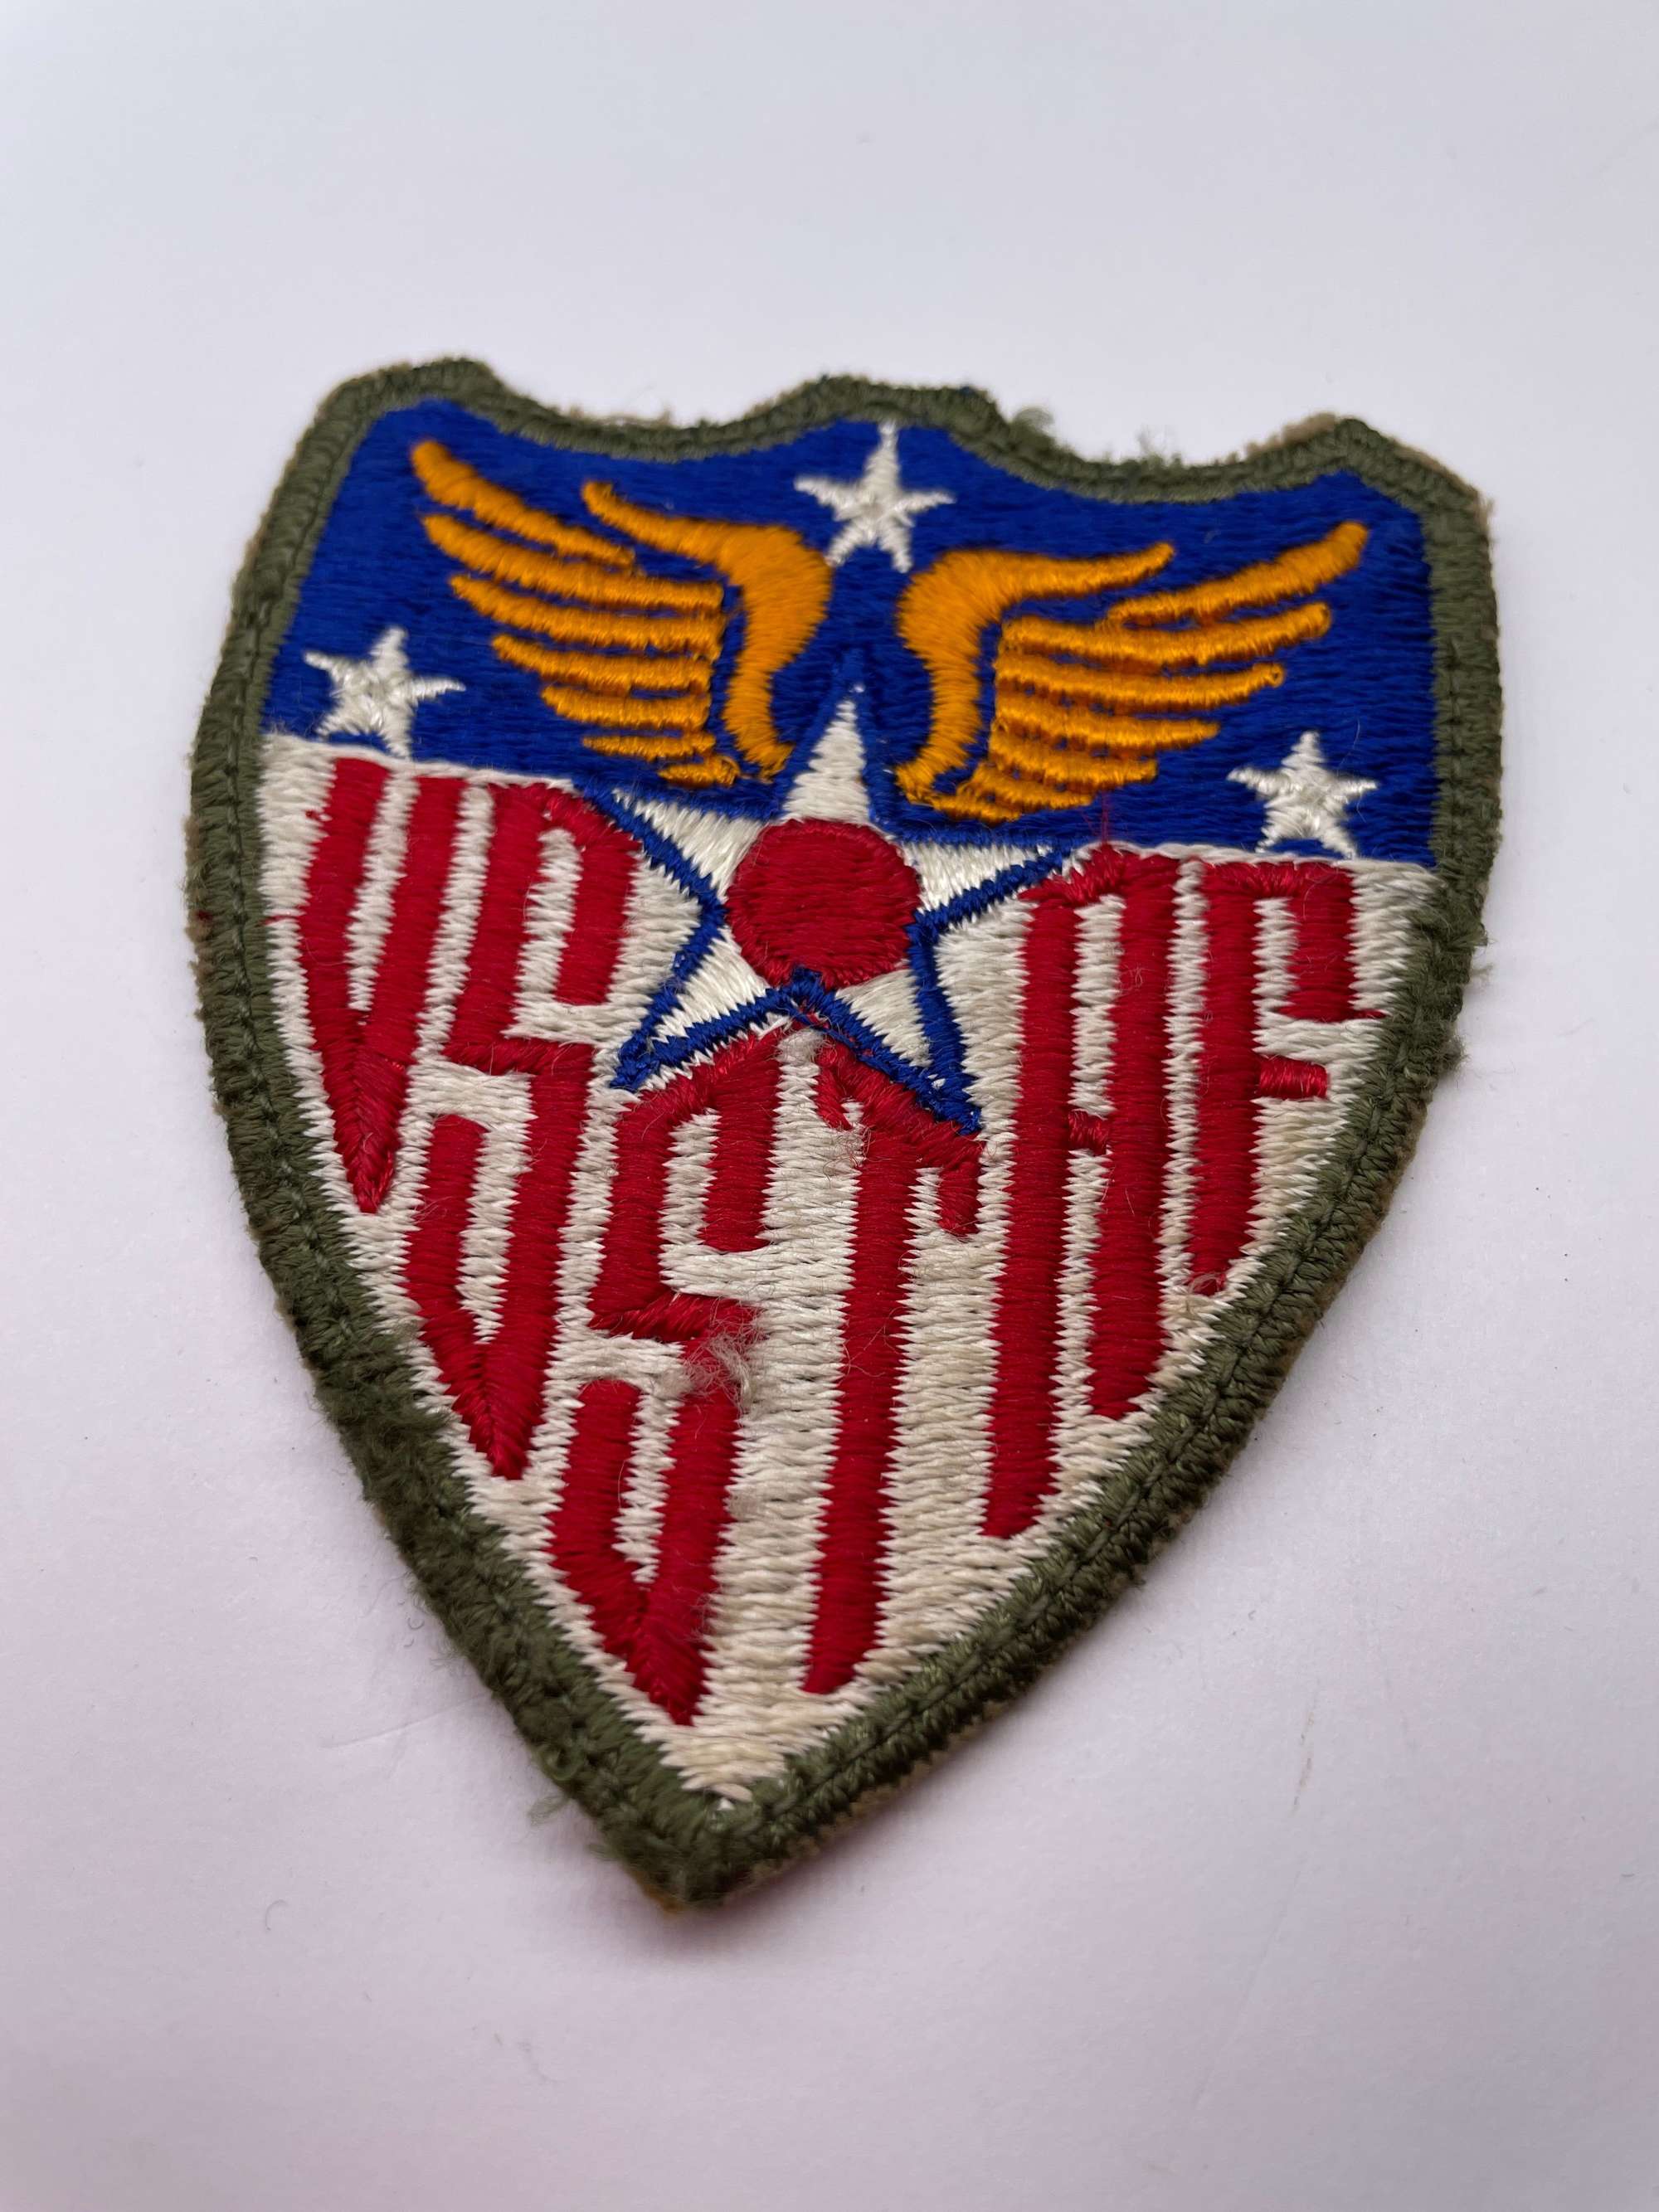 Original World War Two US Strategic Air Forces Patch